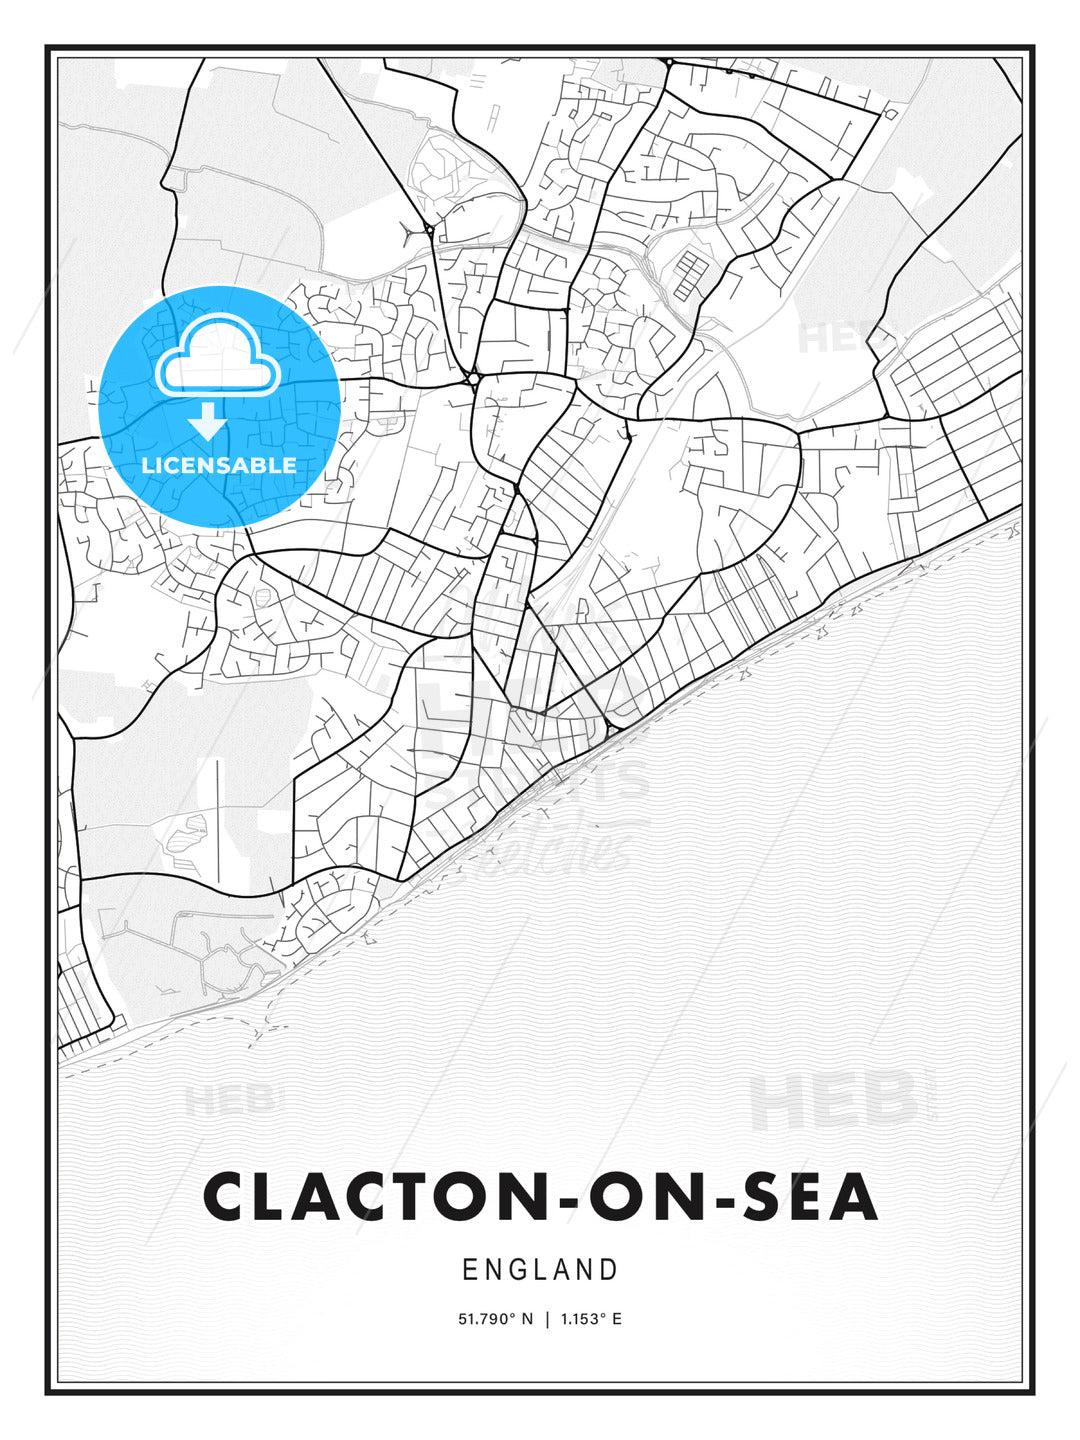 Clacton-on-Sea, England, Modern Print Template in Various Formats - HEBSTREITS Sketches